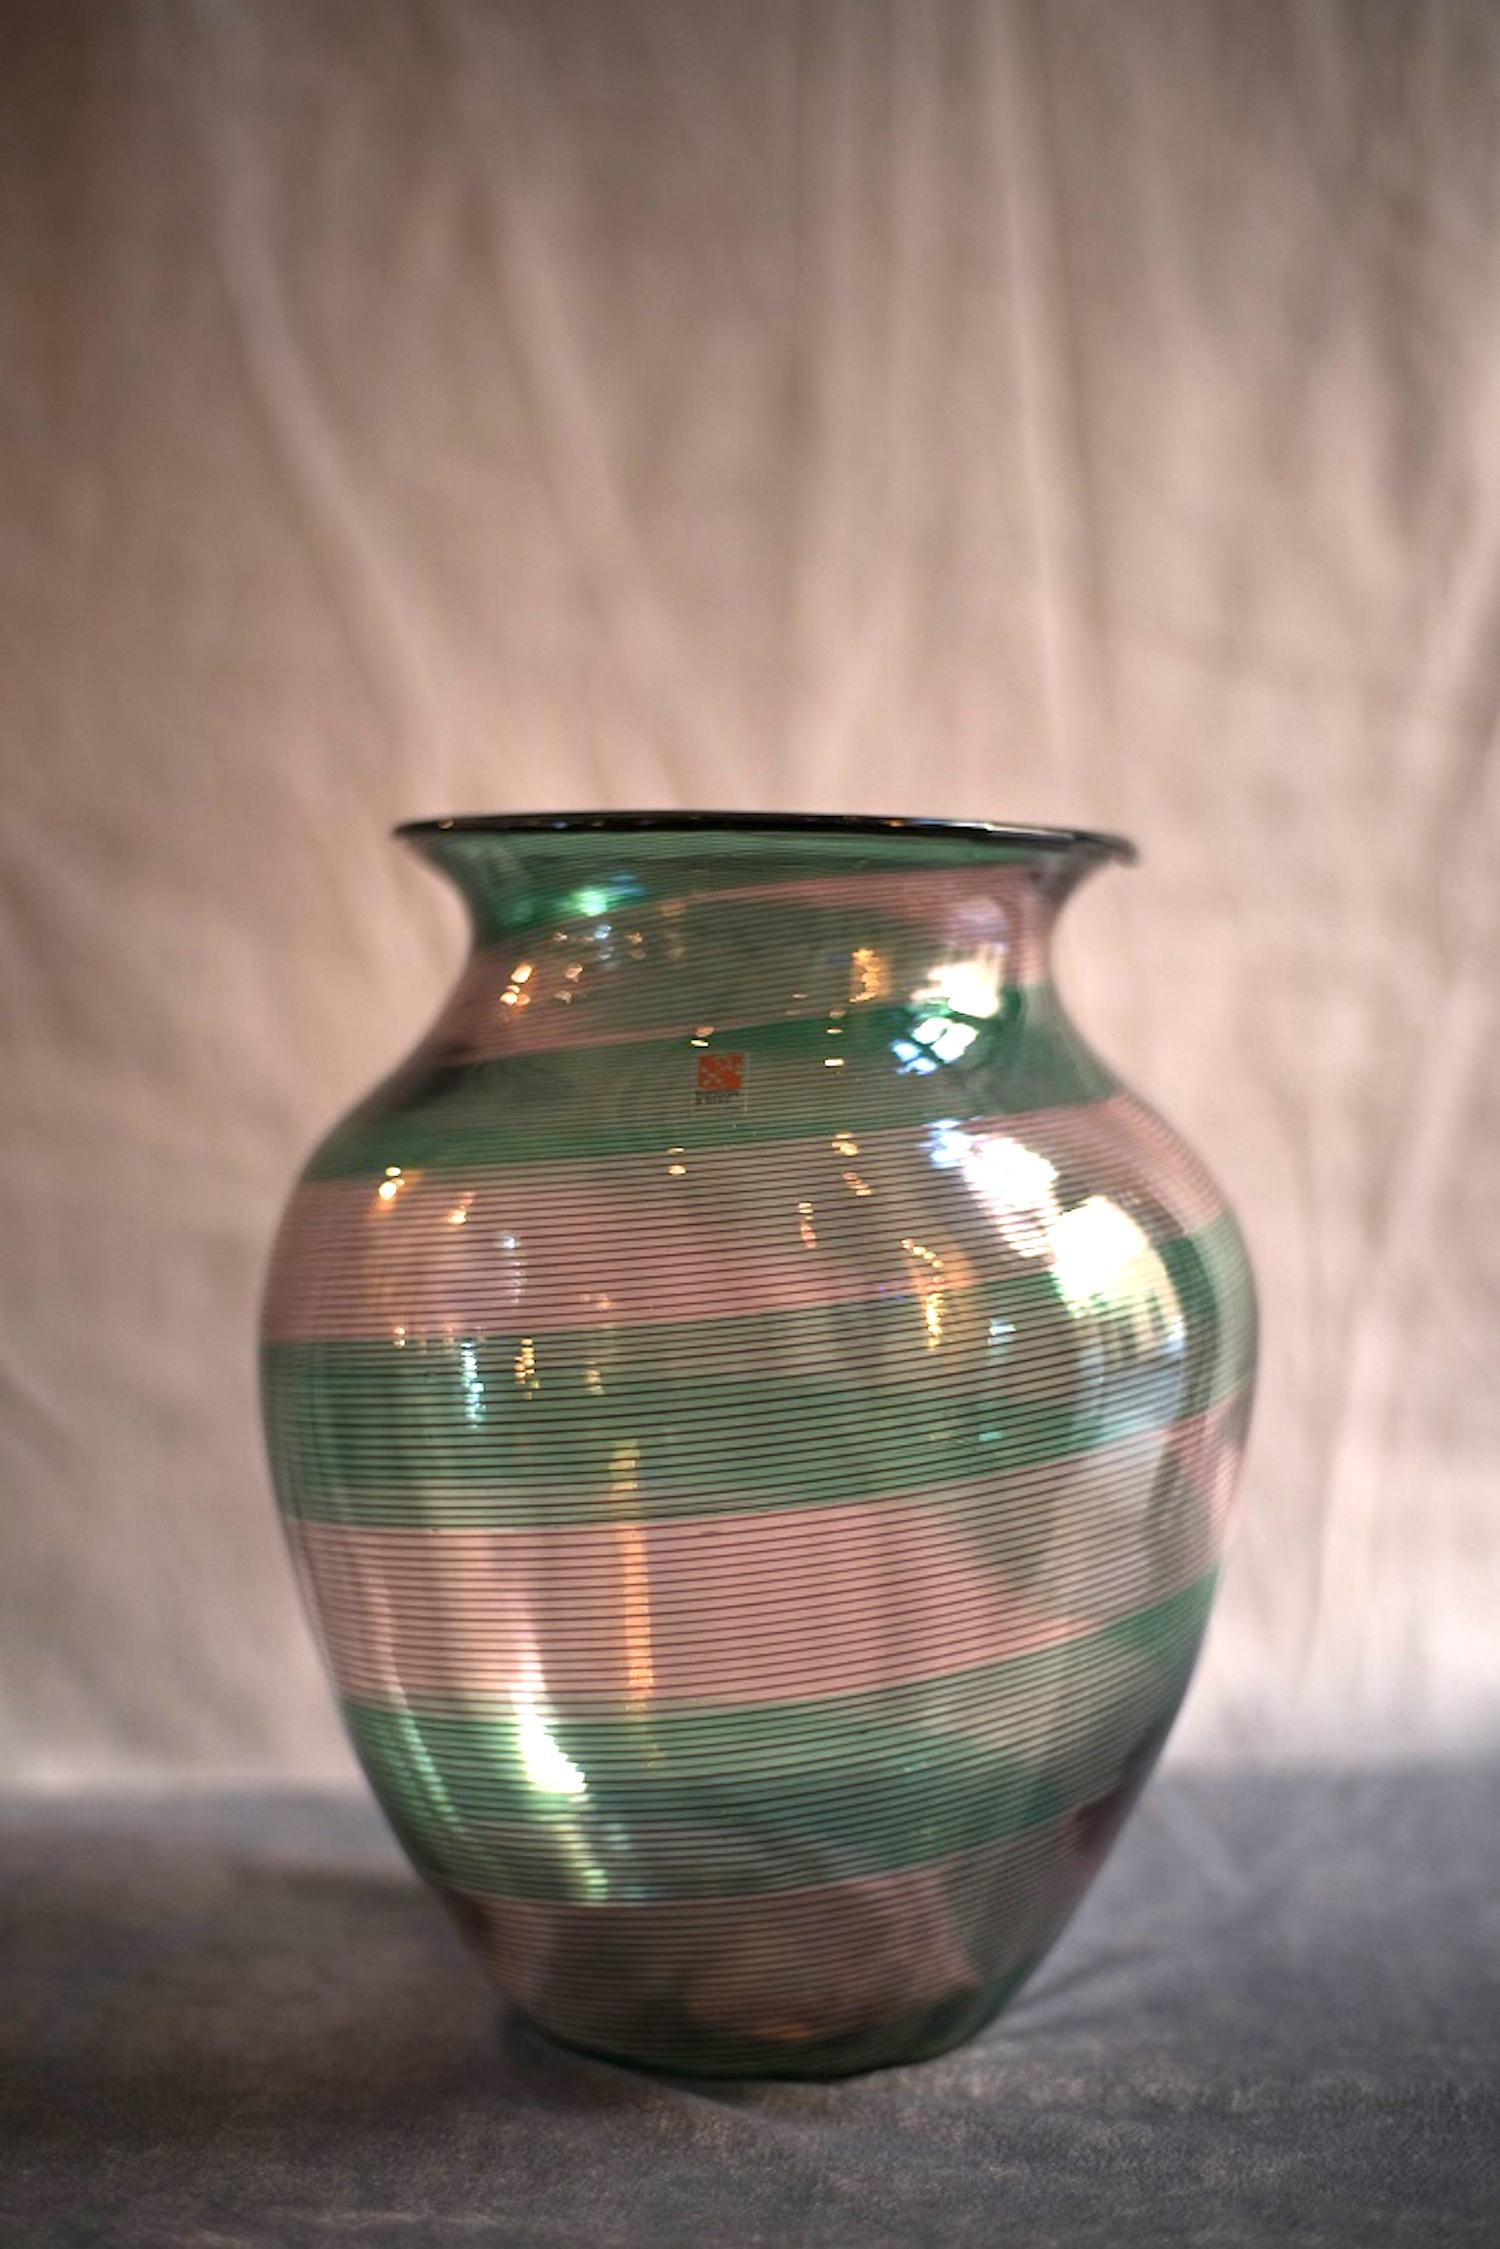 This Chalcedony glass vase is a refined decorative object realized by Barovier & Toso in Murano (Venice) in the 1980s.

Chalcedony glass vase with the surface crossed by pink and red stripes.

Label of the Company applied.

Excellent